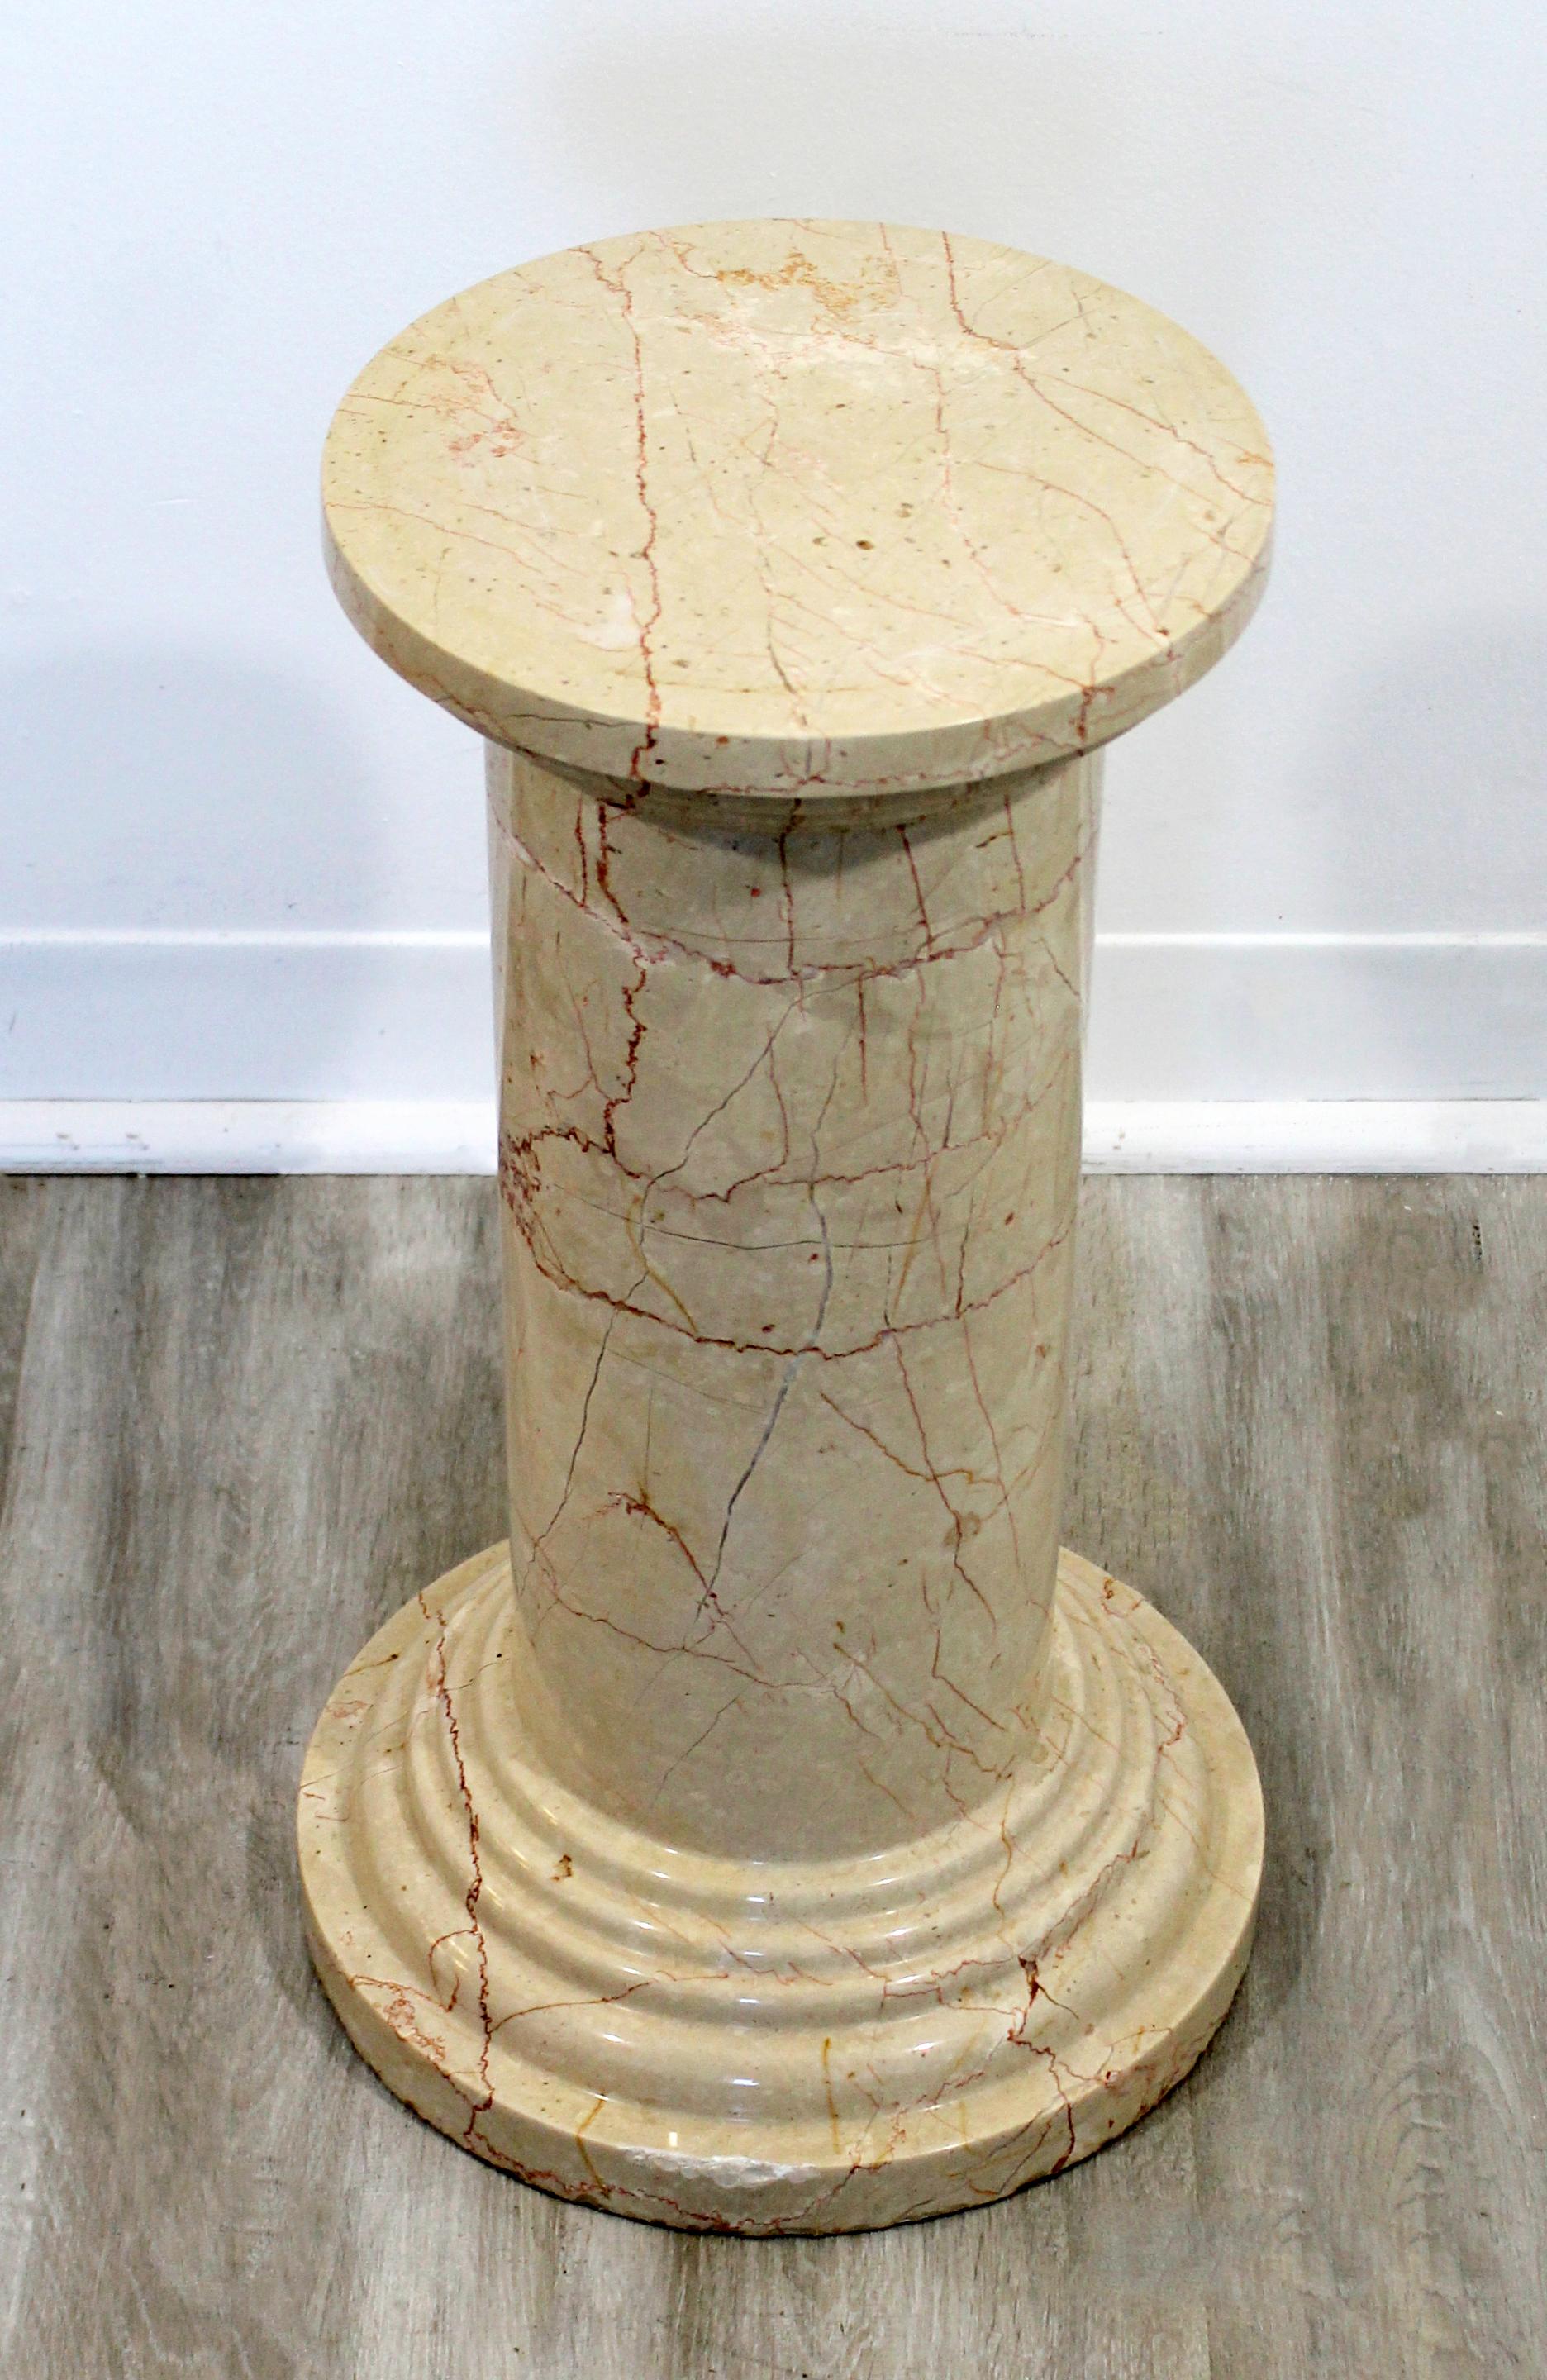 For your consideration is a sweet and short, marble pedestal display stand, made in Italy, circa the 1960s. In very good vintage condition. The dimensions are 9.5